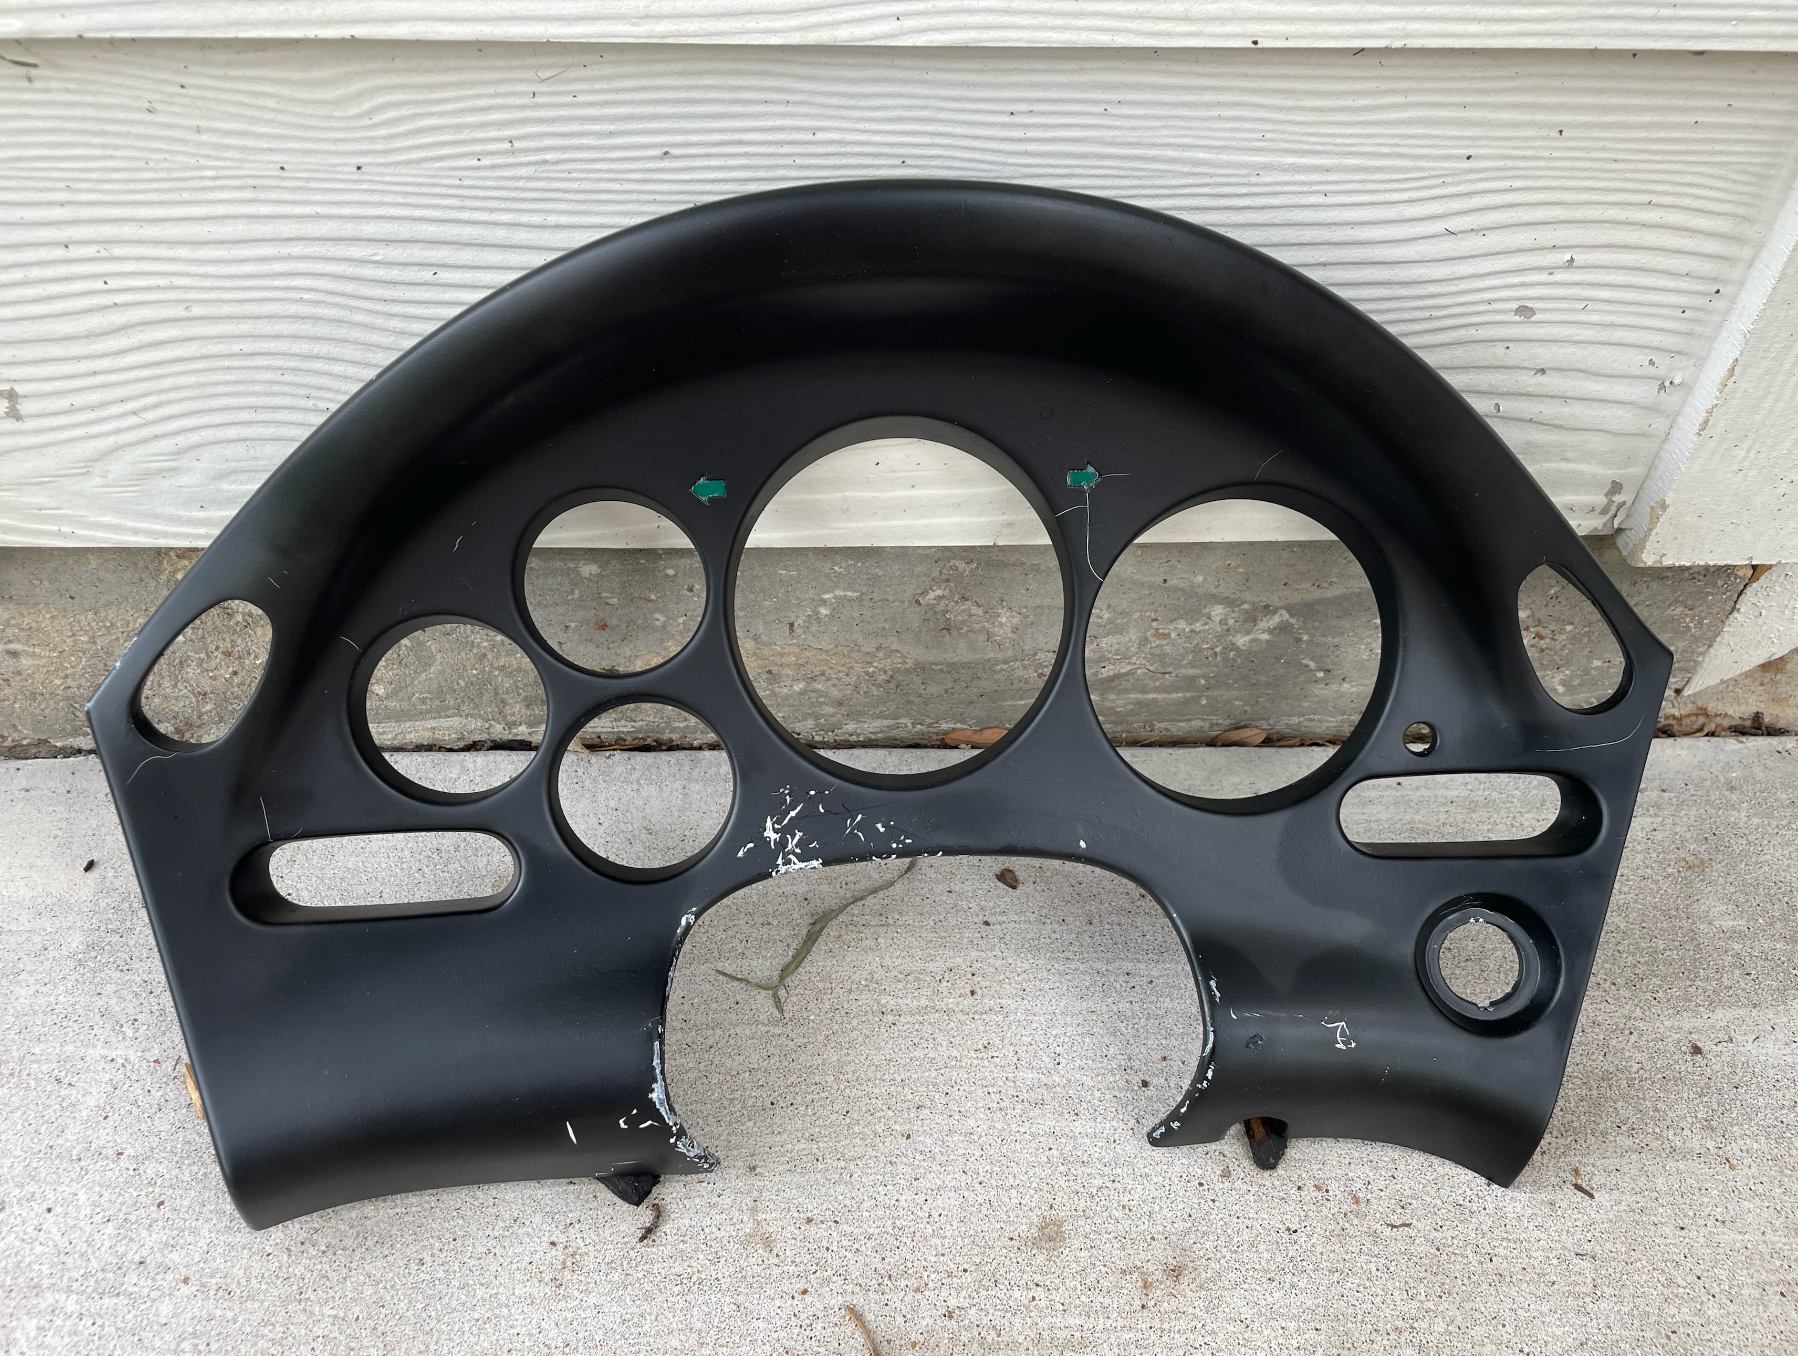 Interior/Upholstery - 1993 FD RX-7 Gauge Cover - Used - 0  All Models - Fort Worth, TX 76111, United States